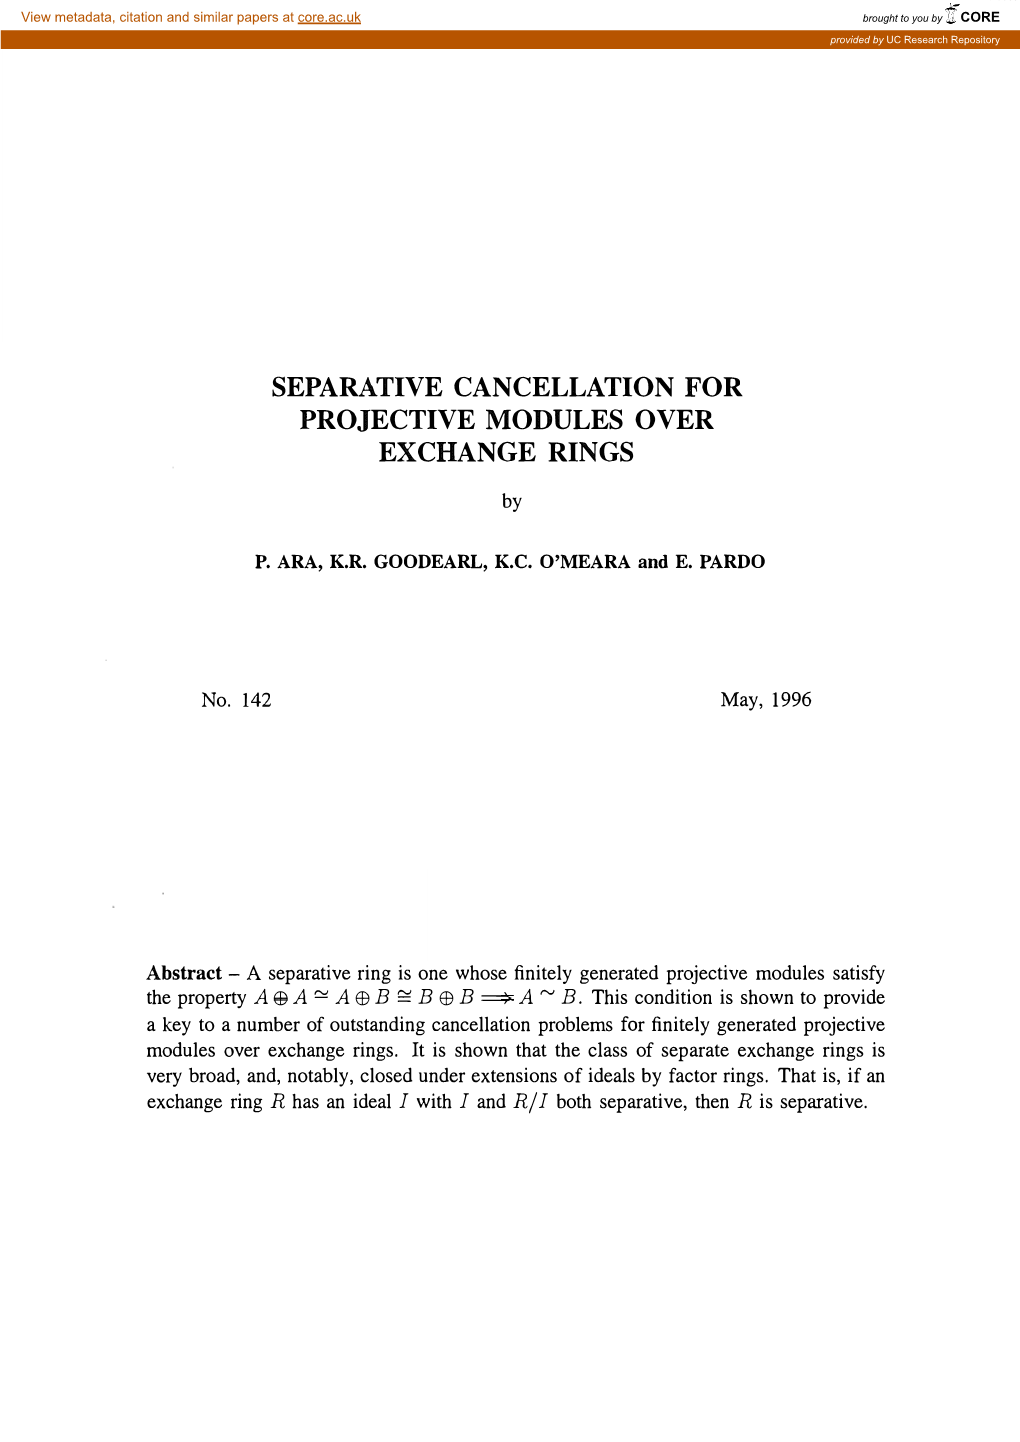 Separative Cancellation for Projective Modules Over Exchange Rings